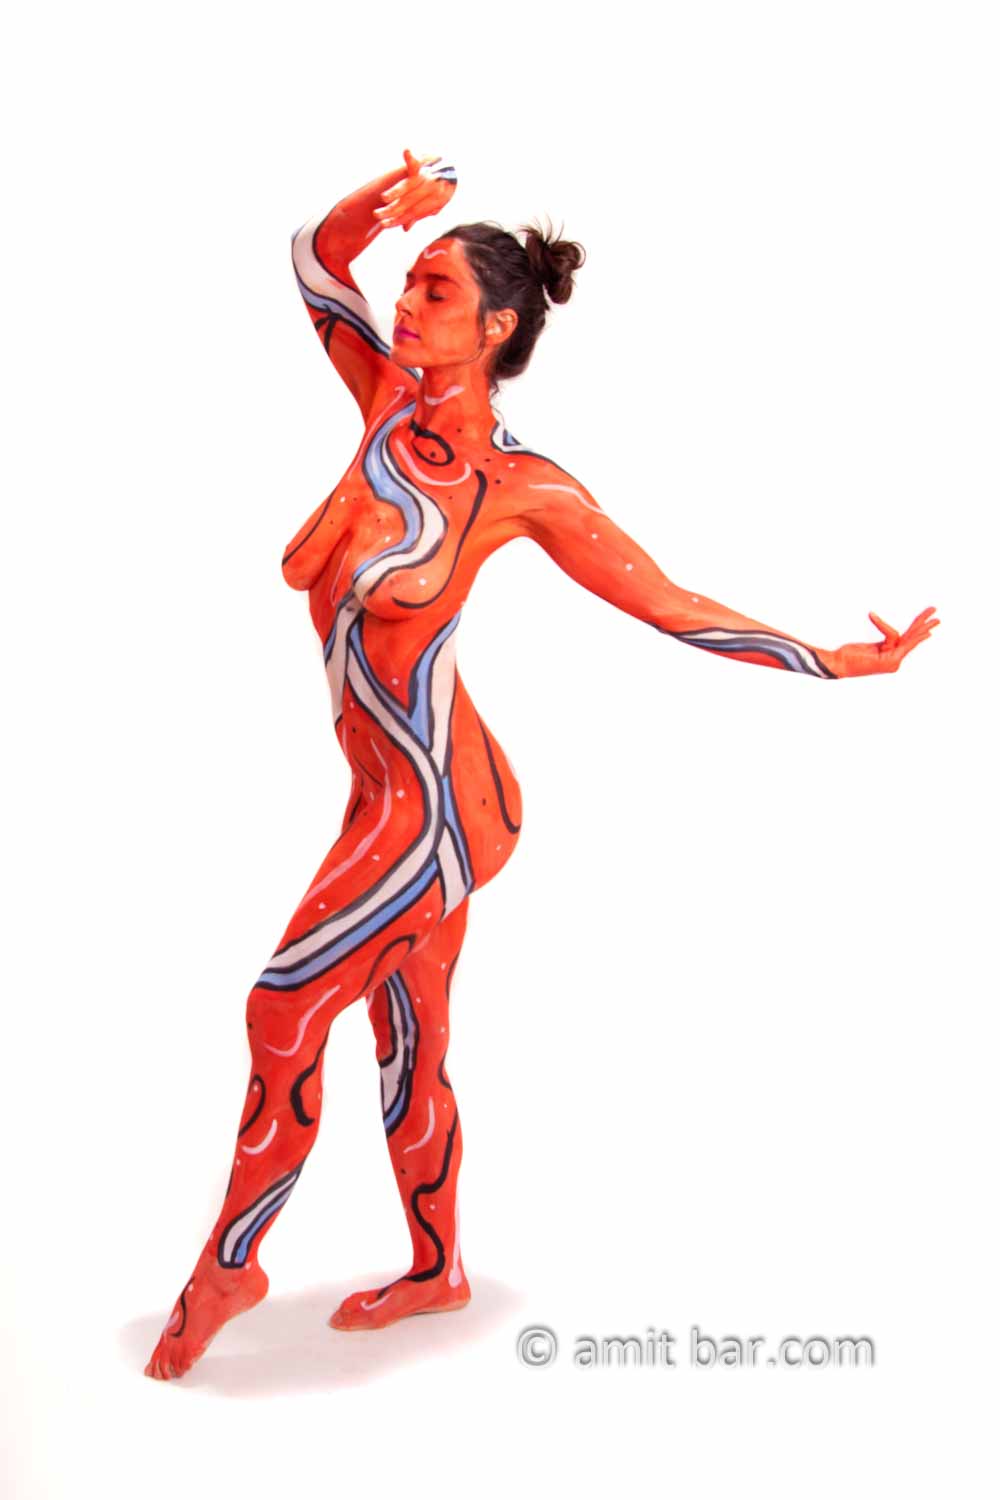 Red & Blue III: Body-painted model is dancing in red & blue design